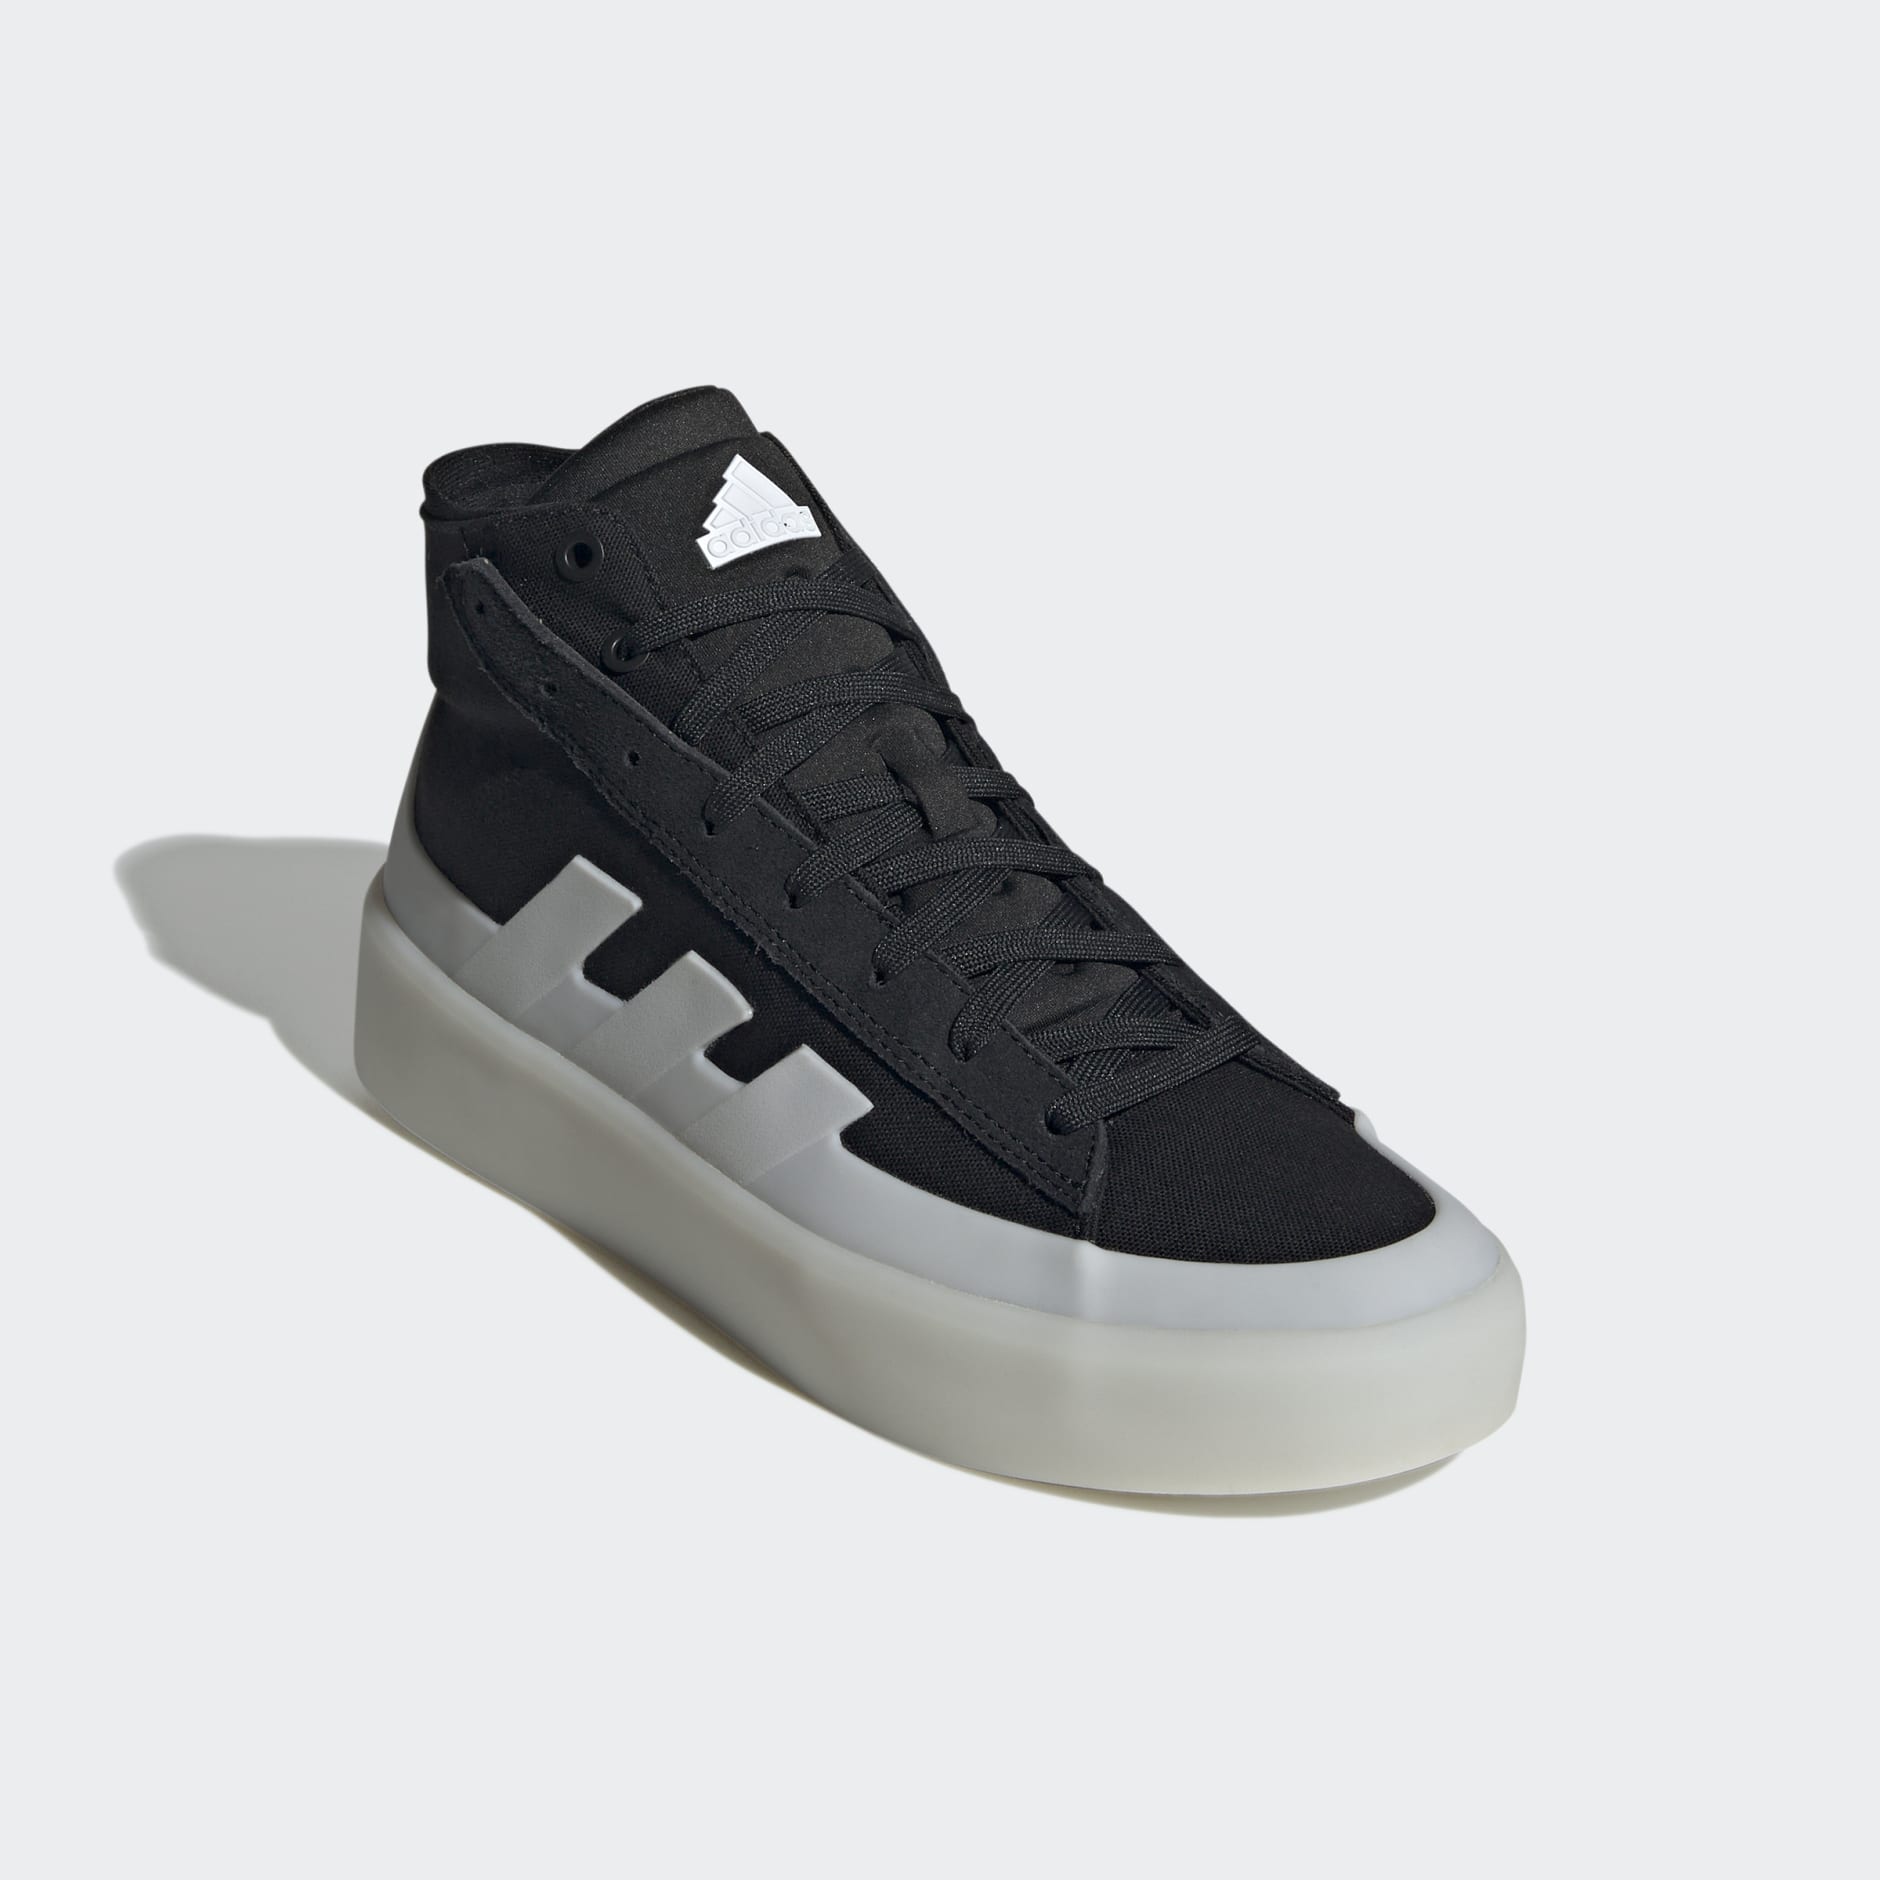 All products - ZNSORED HI Lifestyle Adult Shoe - Black | adidas South ...